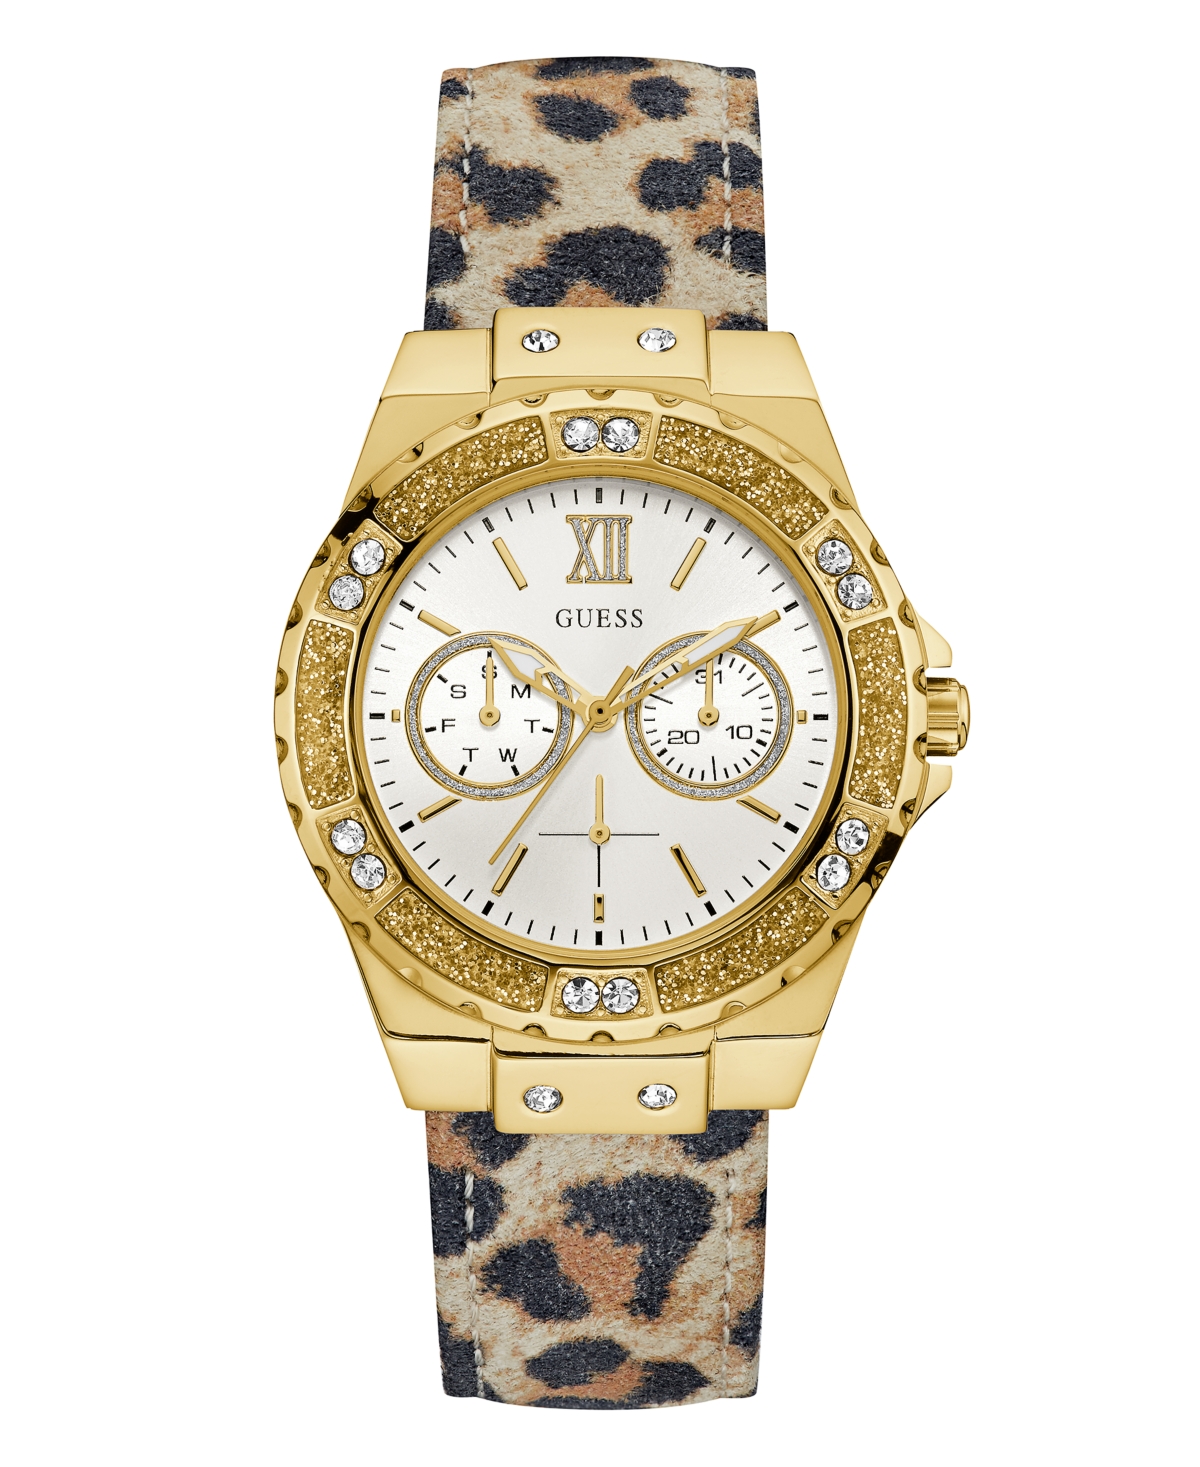 Guess Women's Multi-function Animal Print Genuine Leather Watch 39mm